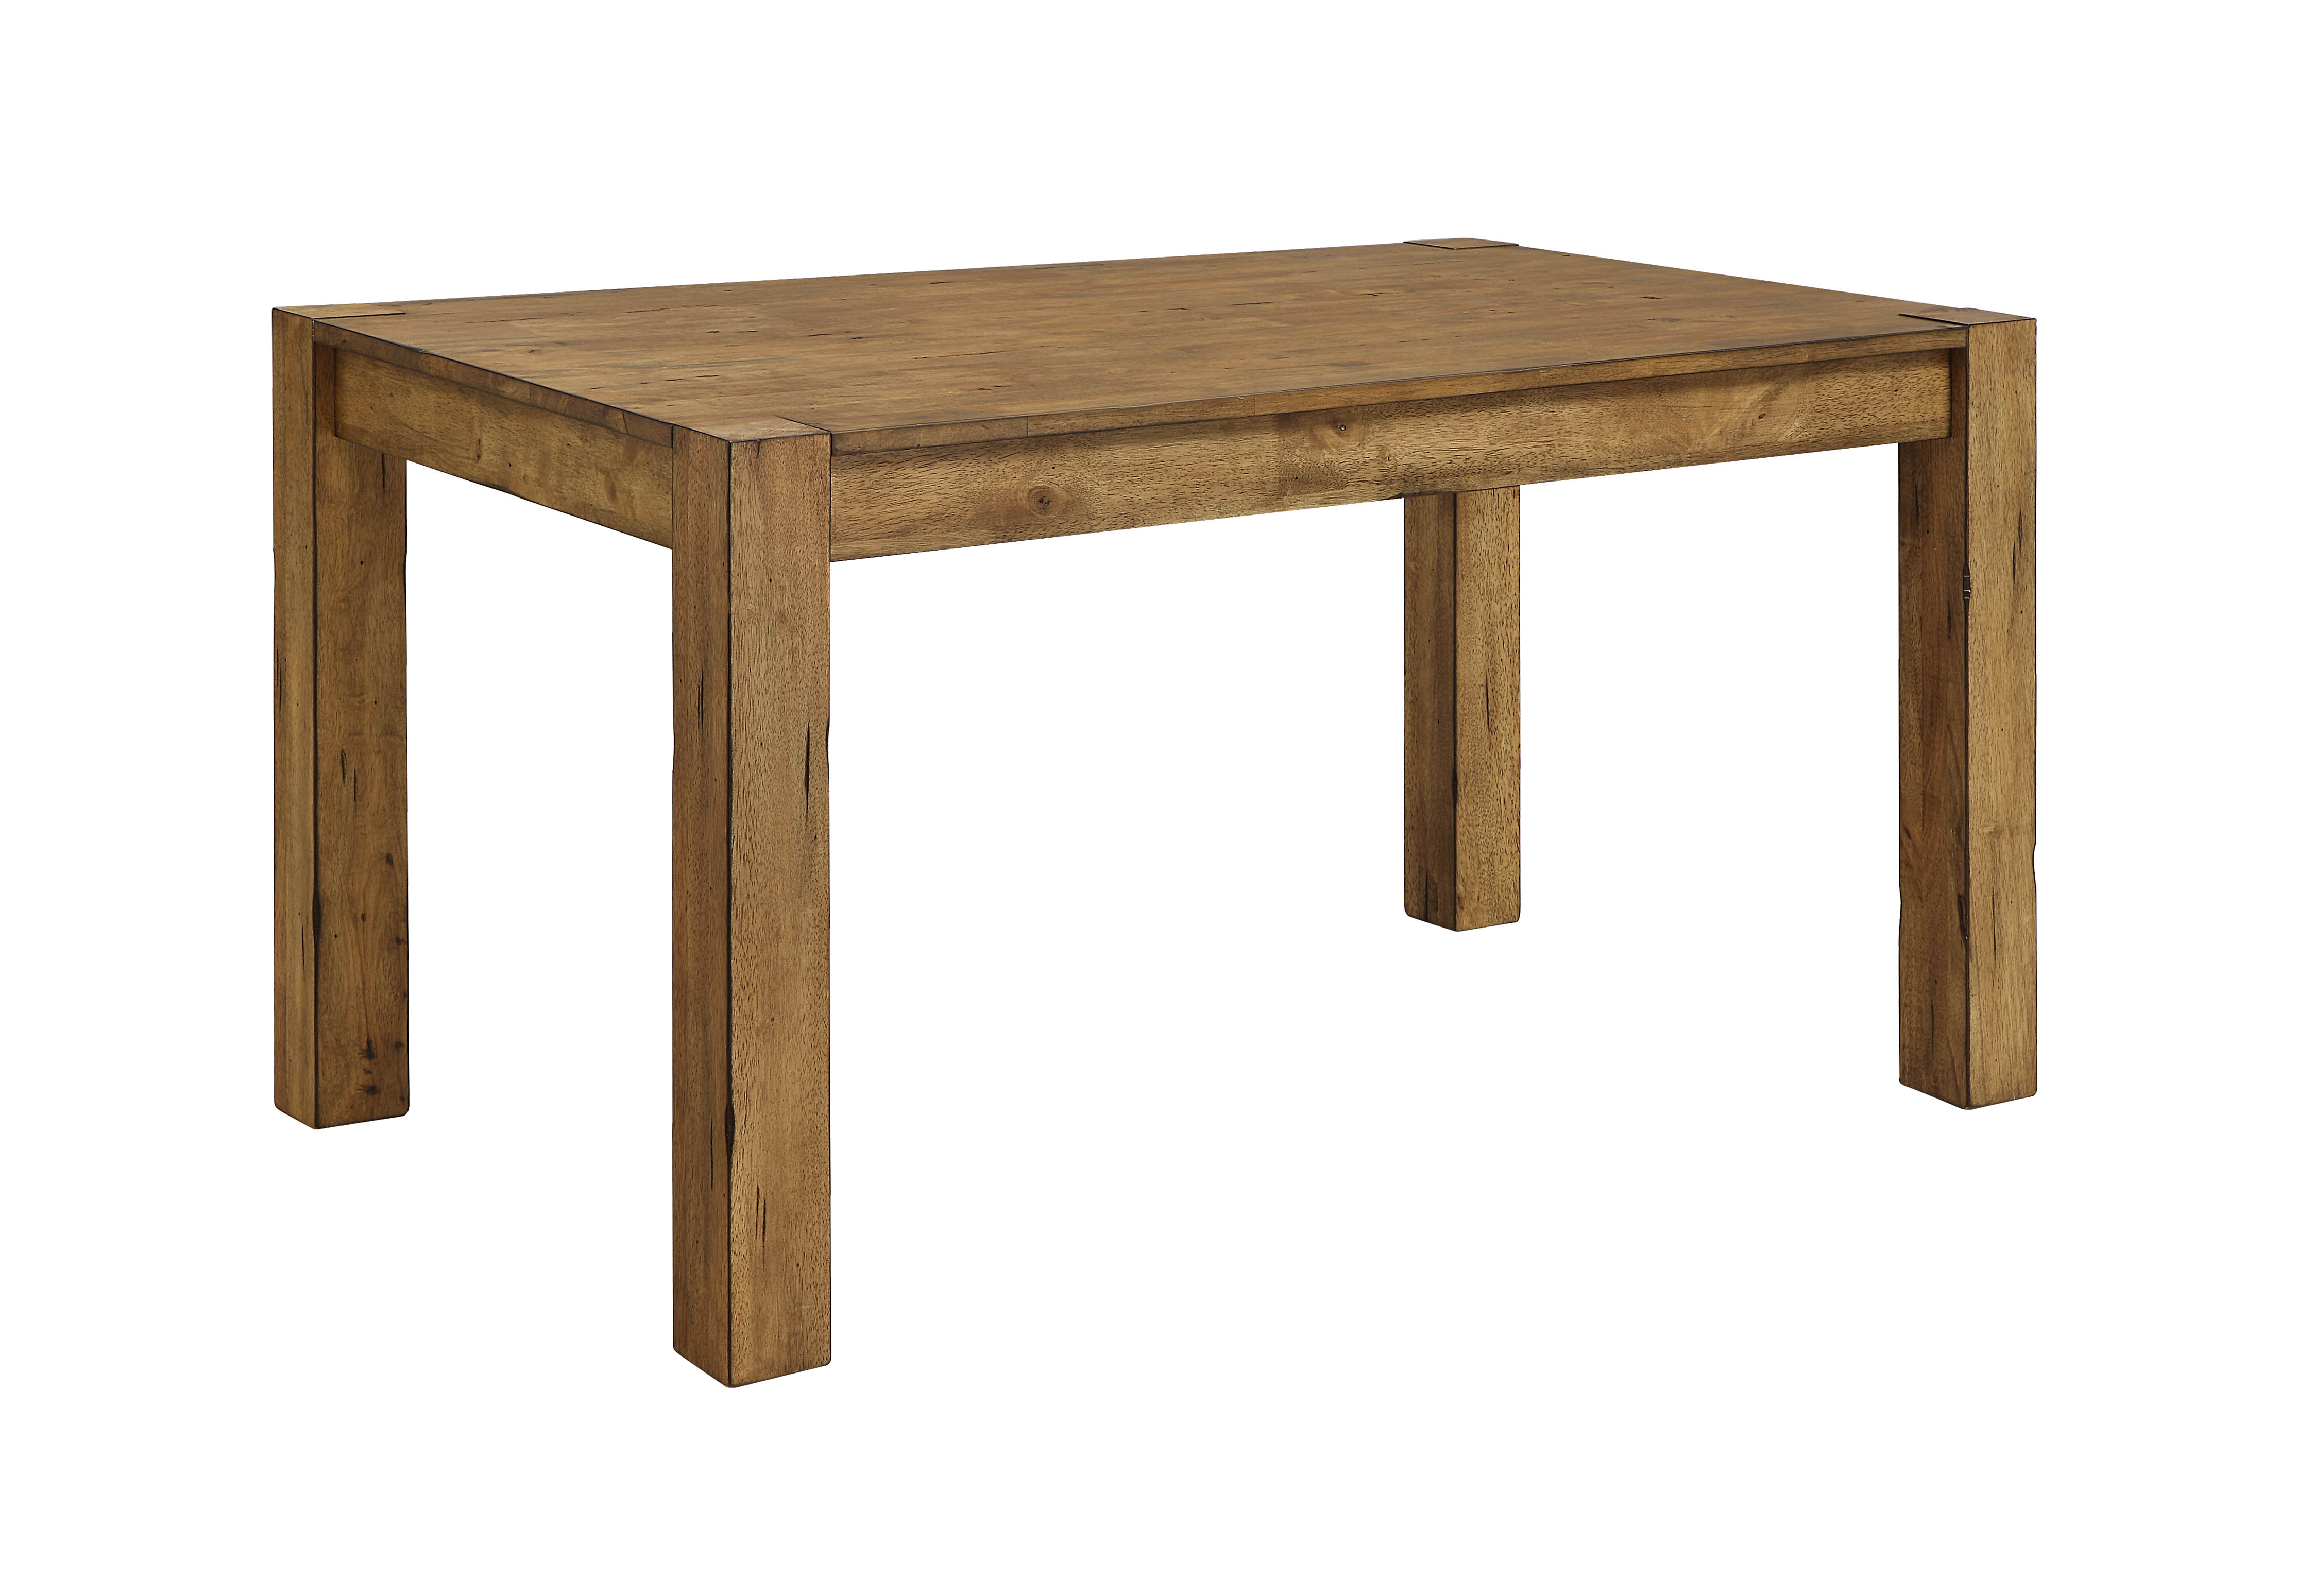 Better Homes & Gardens Bryant Solid Wood Dining Table, Rustic Brown - image 1 of 14